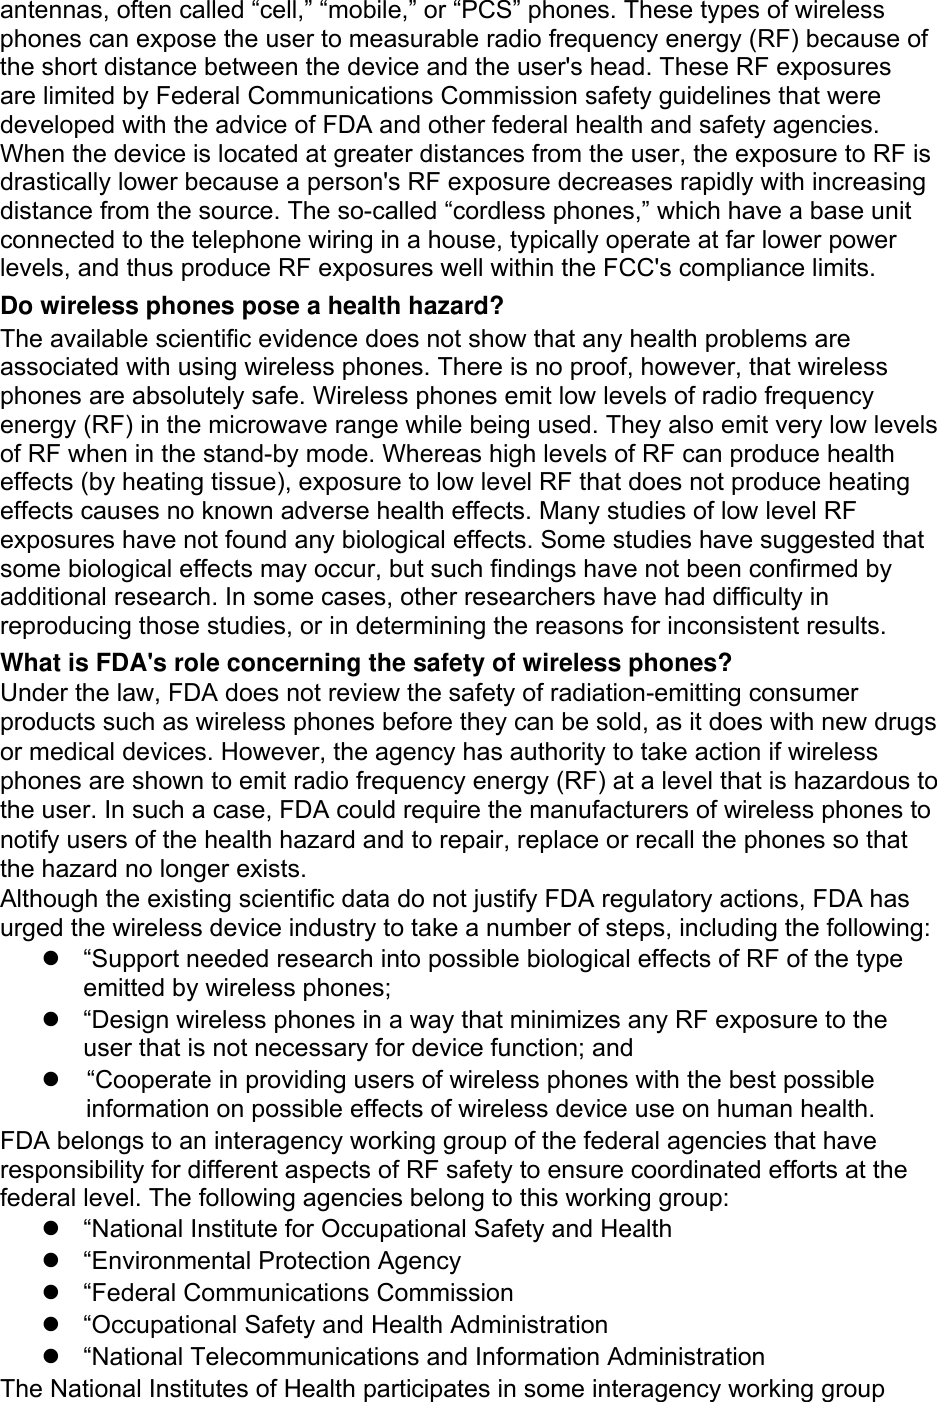 antennas, often called “cell,” “mobile,” or “PCS” phones. These types of wireless phones can expose the user to measurable radio frequency energy (RF) because of the short distance between the device and the user&apos;s head. These RF exposures are limited by Federal Communications Commission safety guidelines that were developed with the advice of FDA and other federal health and safety agencies. When the device is located at greater distances from the user, the exposure to RF is drastically lower because a person&apos;s RF exposure decreases rapidly with increasing distance from the source. The so-called “cordless phones,” which have a base unit connected to the telephone wiring in a house, typically operate at far lower power levels, and thus produce RF exposures well within the FCC&apos;s compliance limits. Do wireless phones pose a health hazard? The available scientific evidence does not show that any health problems are associated with using wireless phones. There is no proof, however, that wireless phones are absolutely safe. Wireless phones emit low levels of radio frequency energy (RF) in the microwave range while being used. They also emit very low levels of RF when in the stand-by mode. Whereas high levels of RF can produce health effects (by heating tissue), exposure to low level RF that does not produce heating effects causes no known adverse health effects. Many studies of low level RF exposures have not found any biological effects. Some studies have suggested that some biological effects may occur, but such findings have not been confirmed by additional research. In some cases, other researchers have had difficulty in reproducing those studies, or in determining the reasons for inconsistent results. What is FDA&apos;s role concerning the safety of wireless phones? Under the law, FDA does not review the safety of radiation-emitting consumer products such as wireless phones before they can be sold, as it does with new drugs or medical devices. However, the agency has authority to take action if wireless phones are shown to emit radio frequency energy (RF) at a level that is hazardous to the user. In such a case, FDA could require the manufacturers of wireless phones to notify users of the health hazard and to repair, replace or recall the phones so that the hazard no longer exists. Although the existing scientific data do not justify FDA regulatory actions, FDA has urged the wireless device industry to take a number of steps, including the following: “Support needed research into possible biological effects of RF of the typeemitted by wireless phones;“Design wireless phones in a way that minimizes any RF exposure to theuser that is not necessary for device function; and“Cooperate in providing users of wireless phones with the best possible information on possible effects of wireless device use on human health.FDA belongs to an interagency working group of the federal agencies that have responsibility for different aspects of RF safety to ensure coordinated efforts at the federal level. The following agencies belong to this working group: “National Institute for Occupational Safety and Health“Environmental Protection Agency“Federal Communications Commission“Occupational Safety and Health Administration“National Telecommunications and Information AdministrationThe National Institutes of Health participates in some interagency working group 